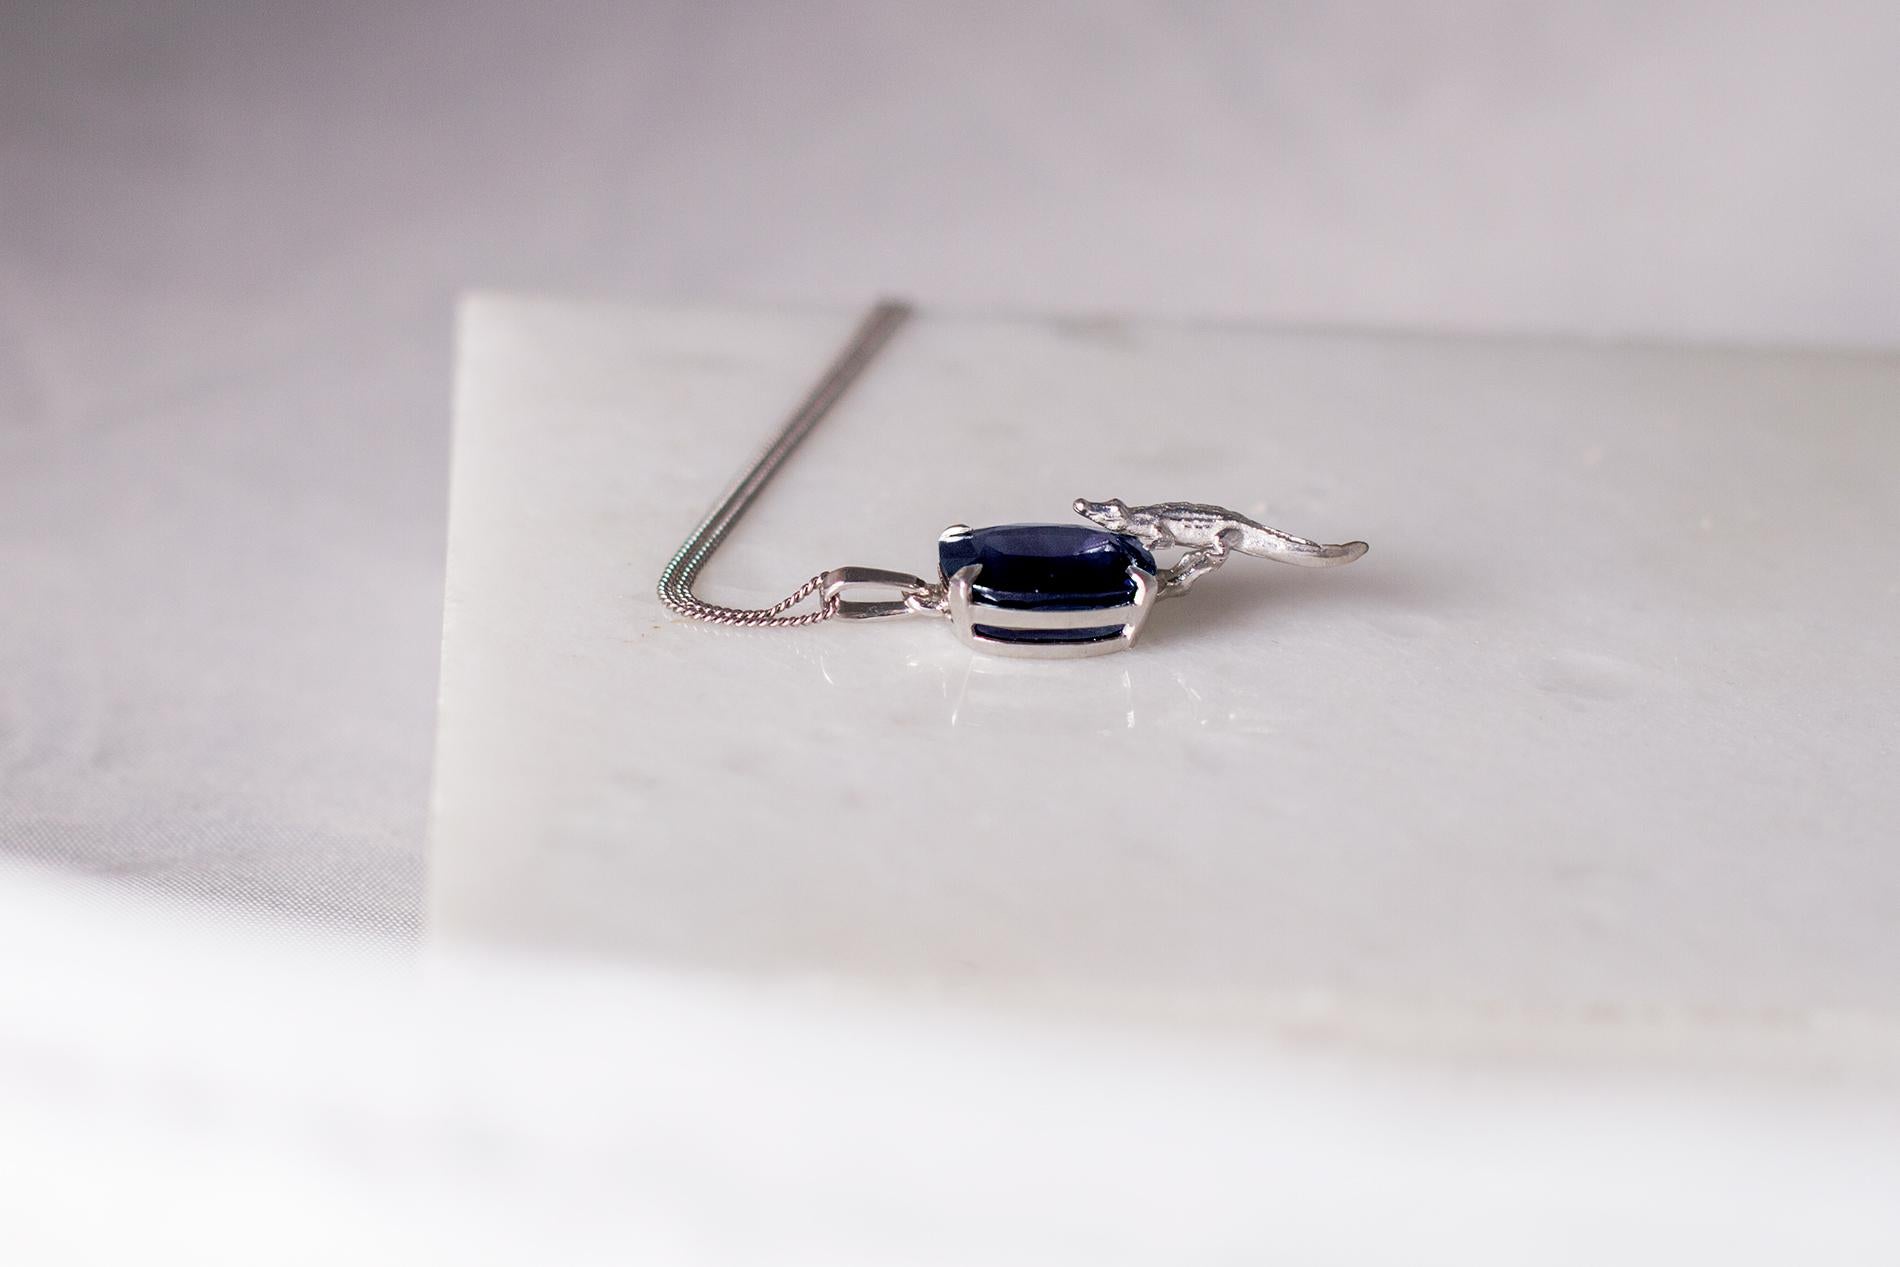 This 18 karat white gold crocodile model pendant necklace is encrusted with 4.32 carats natural dark blue cushion sapphire, 12.8x8.5 mm. The gem catches eye's attention and well designed in contemporary design pendant necklace.

You can order this